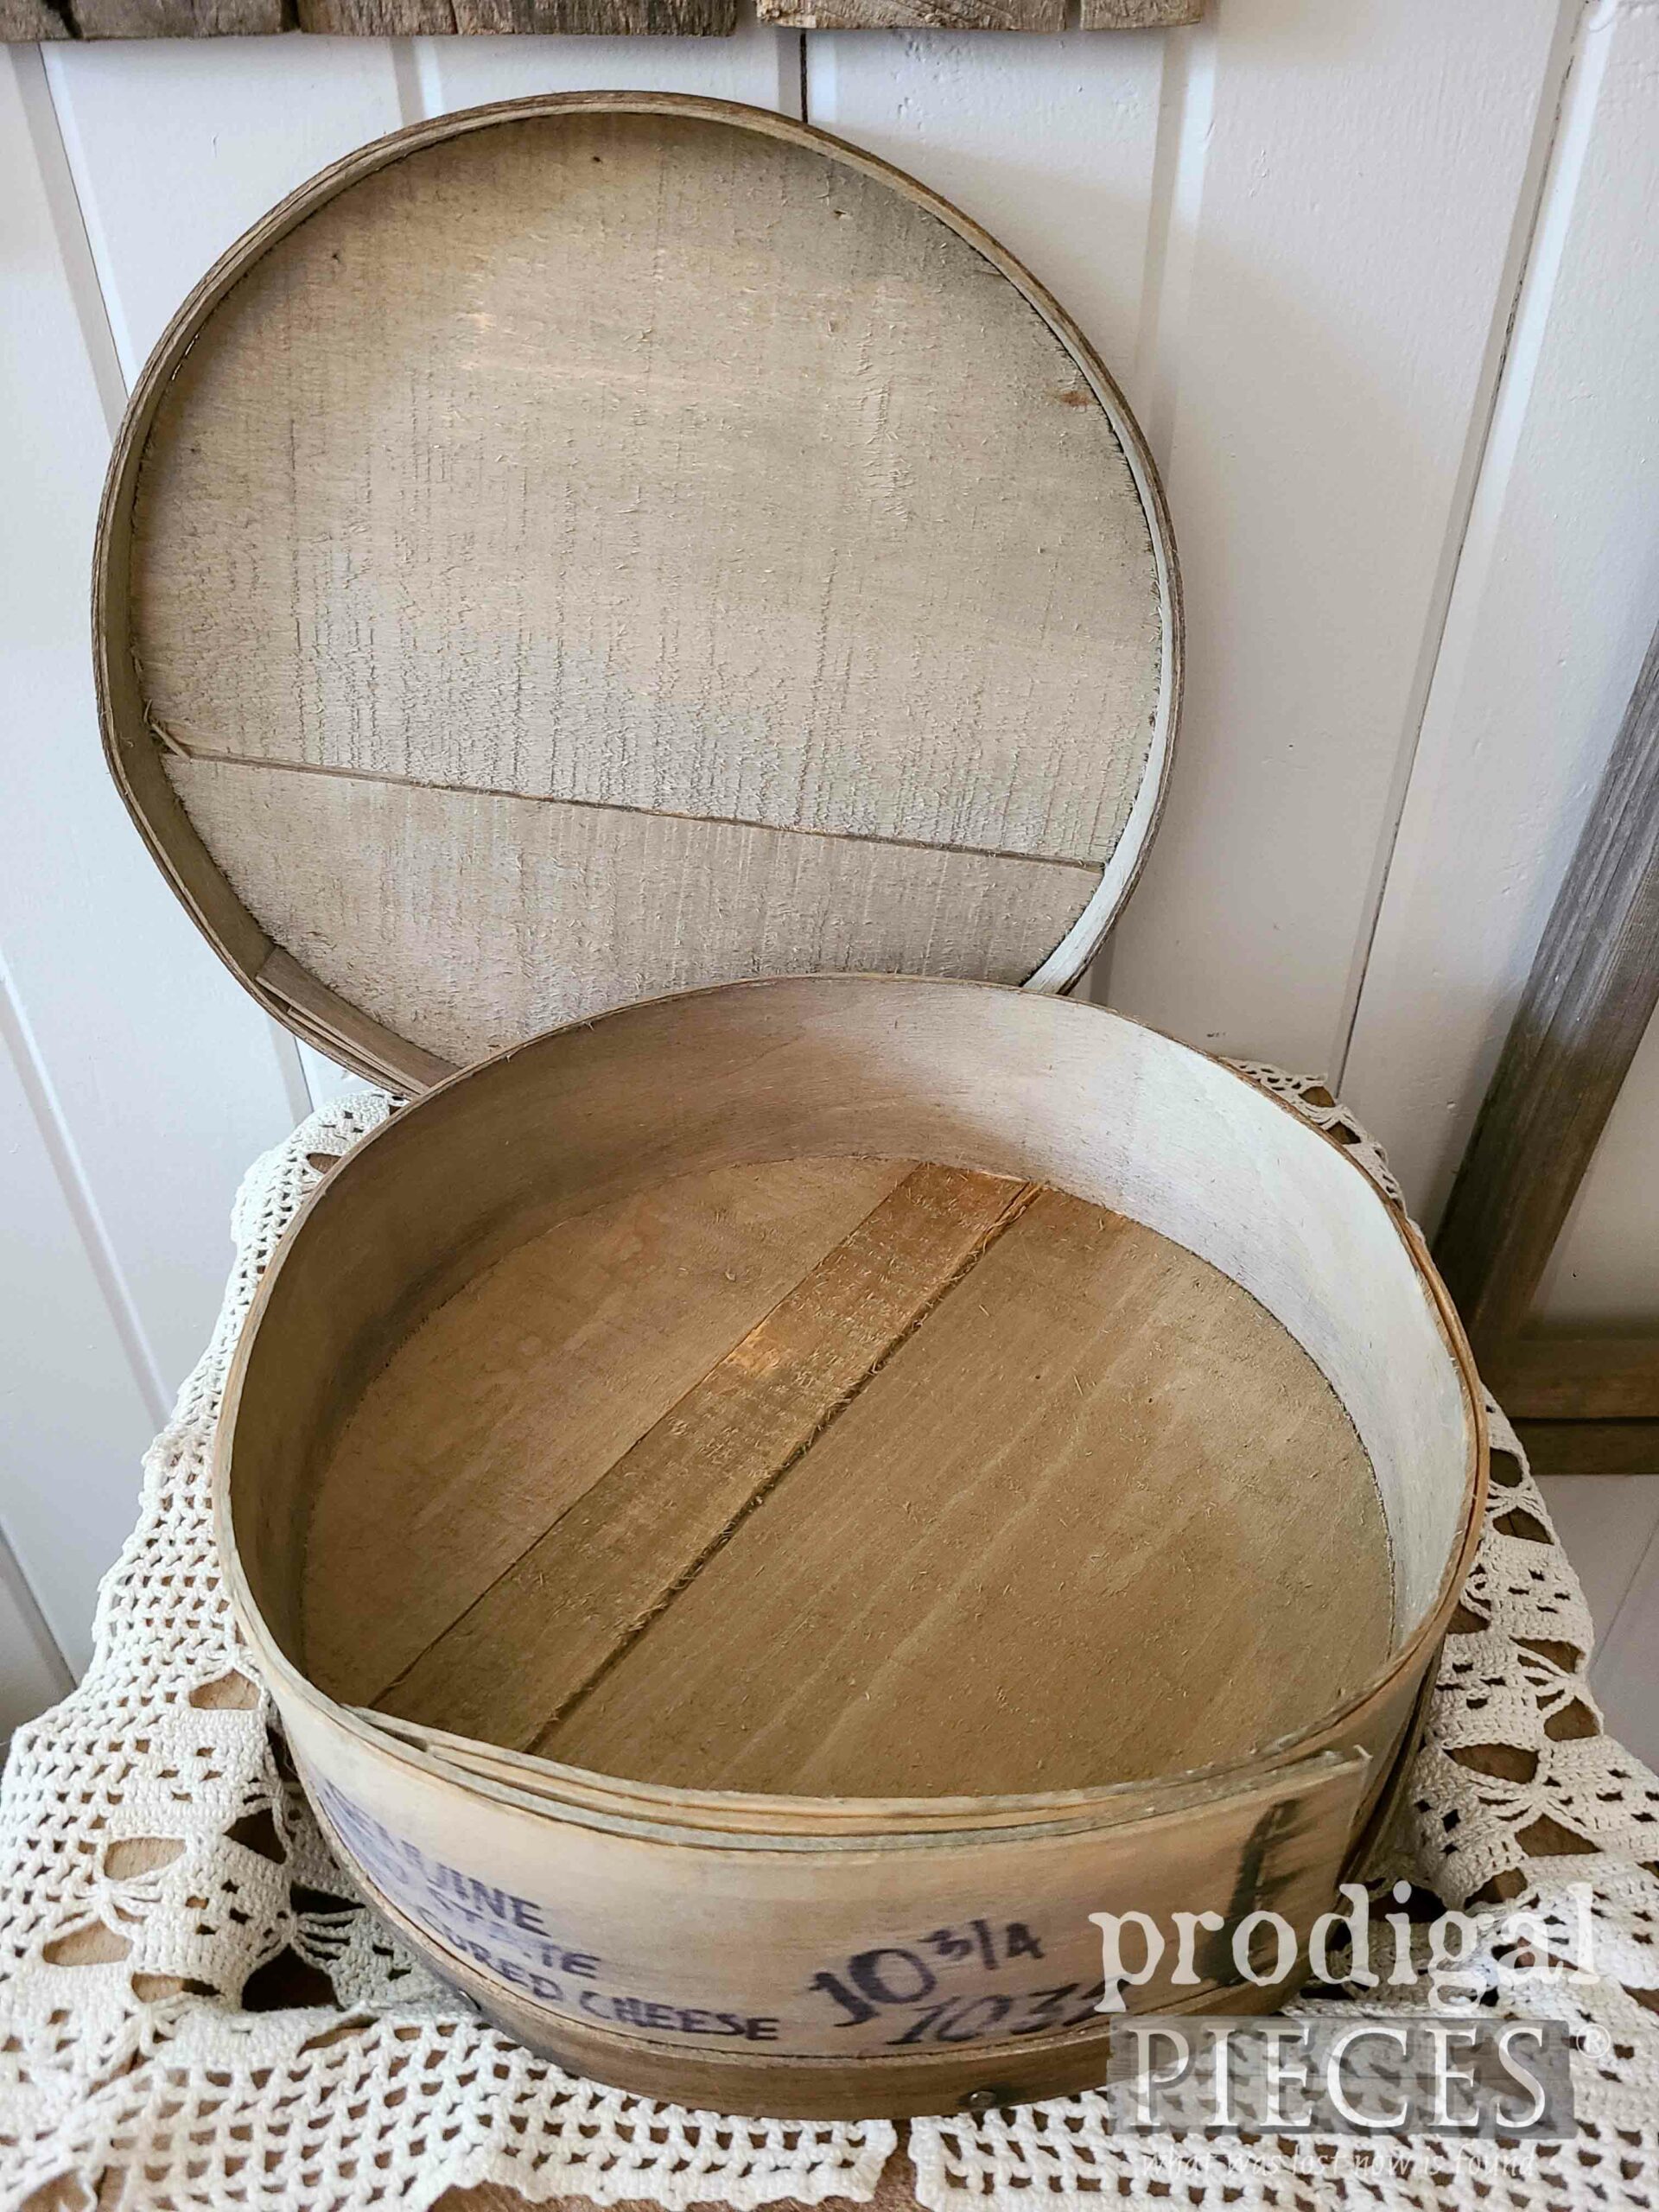 Rustic Stained Antique Cheese Box | shop.prodigalpieces.com #prodigalpieces